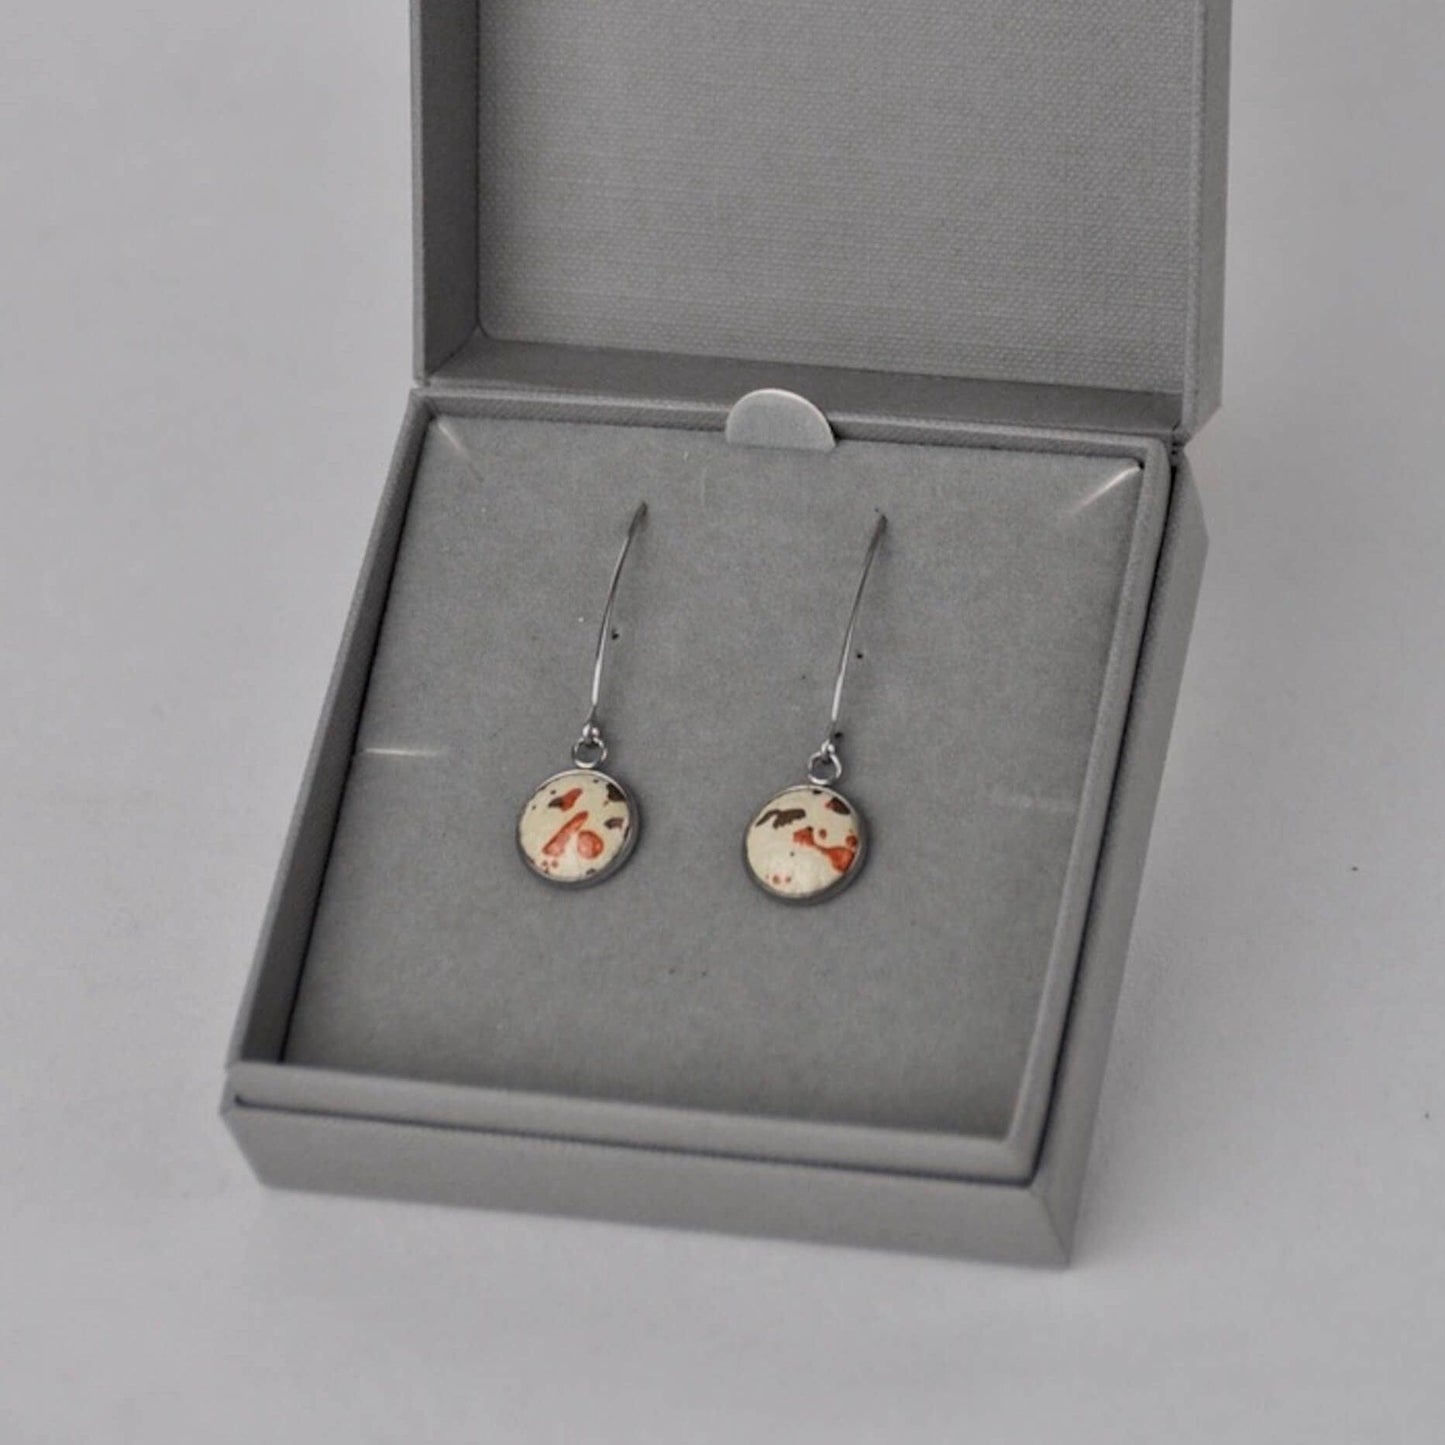 Bex & Bolt Earrings Beige Leatherette with Metallic Bronze & Copper Flecks Stainless Steel V Shape Drops with Gift Box (multiple colours)